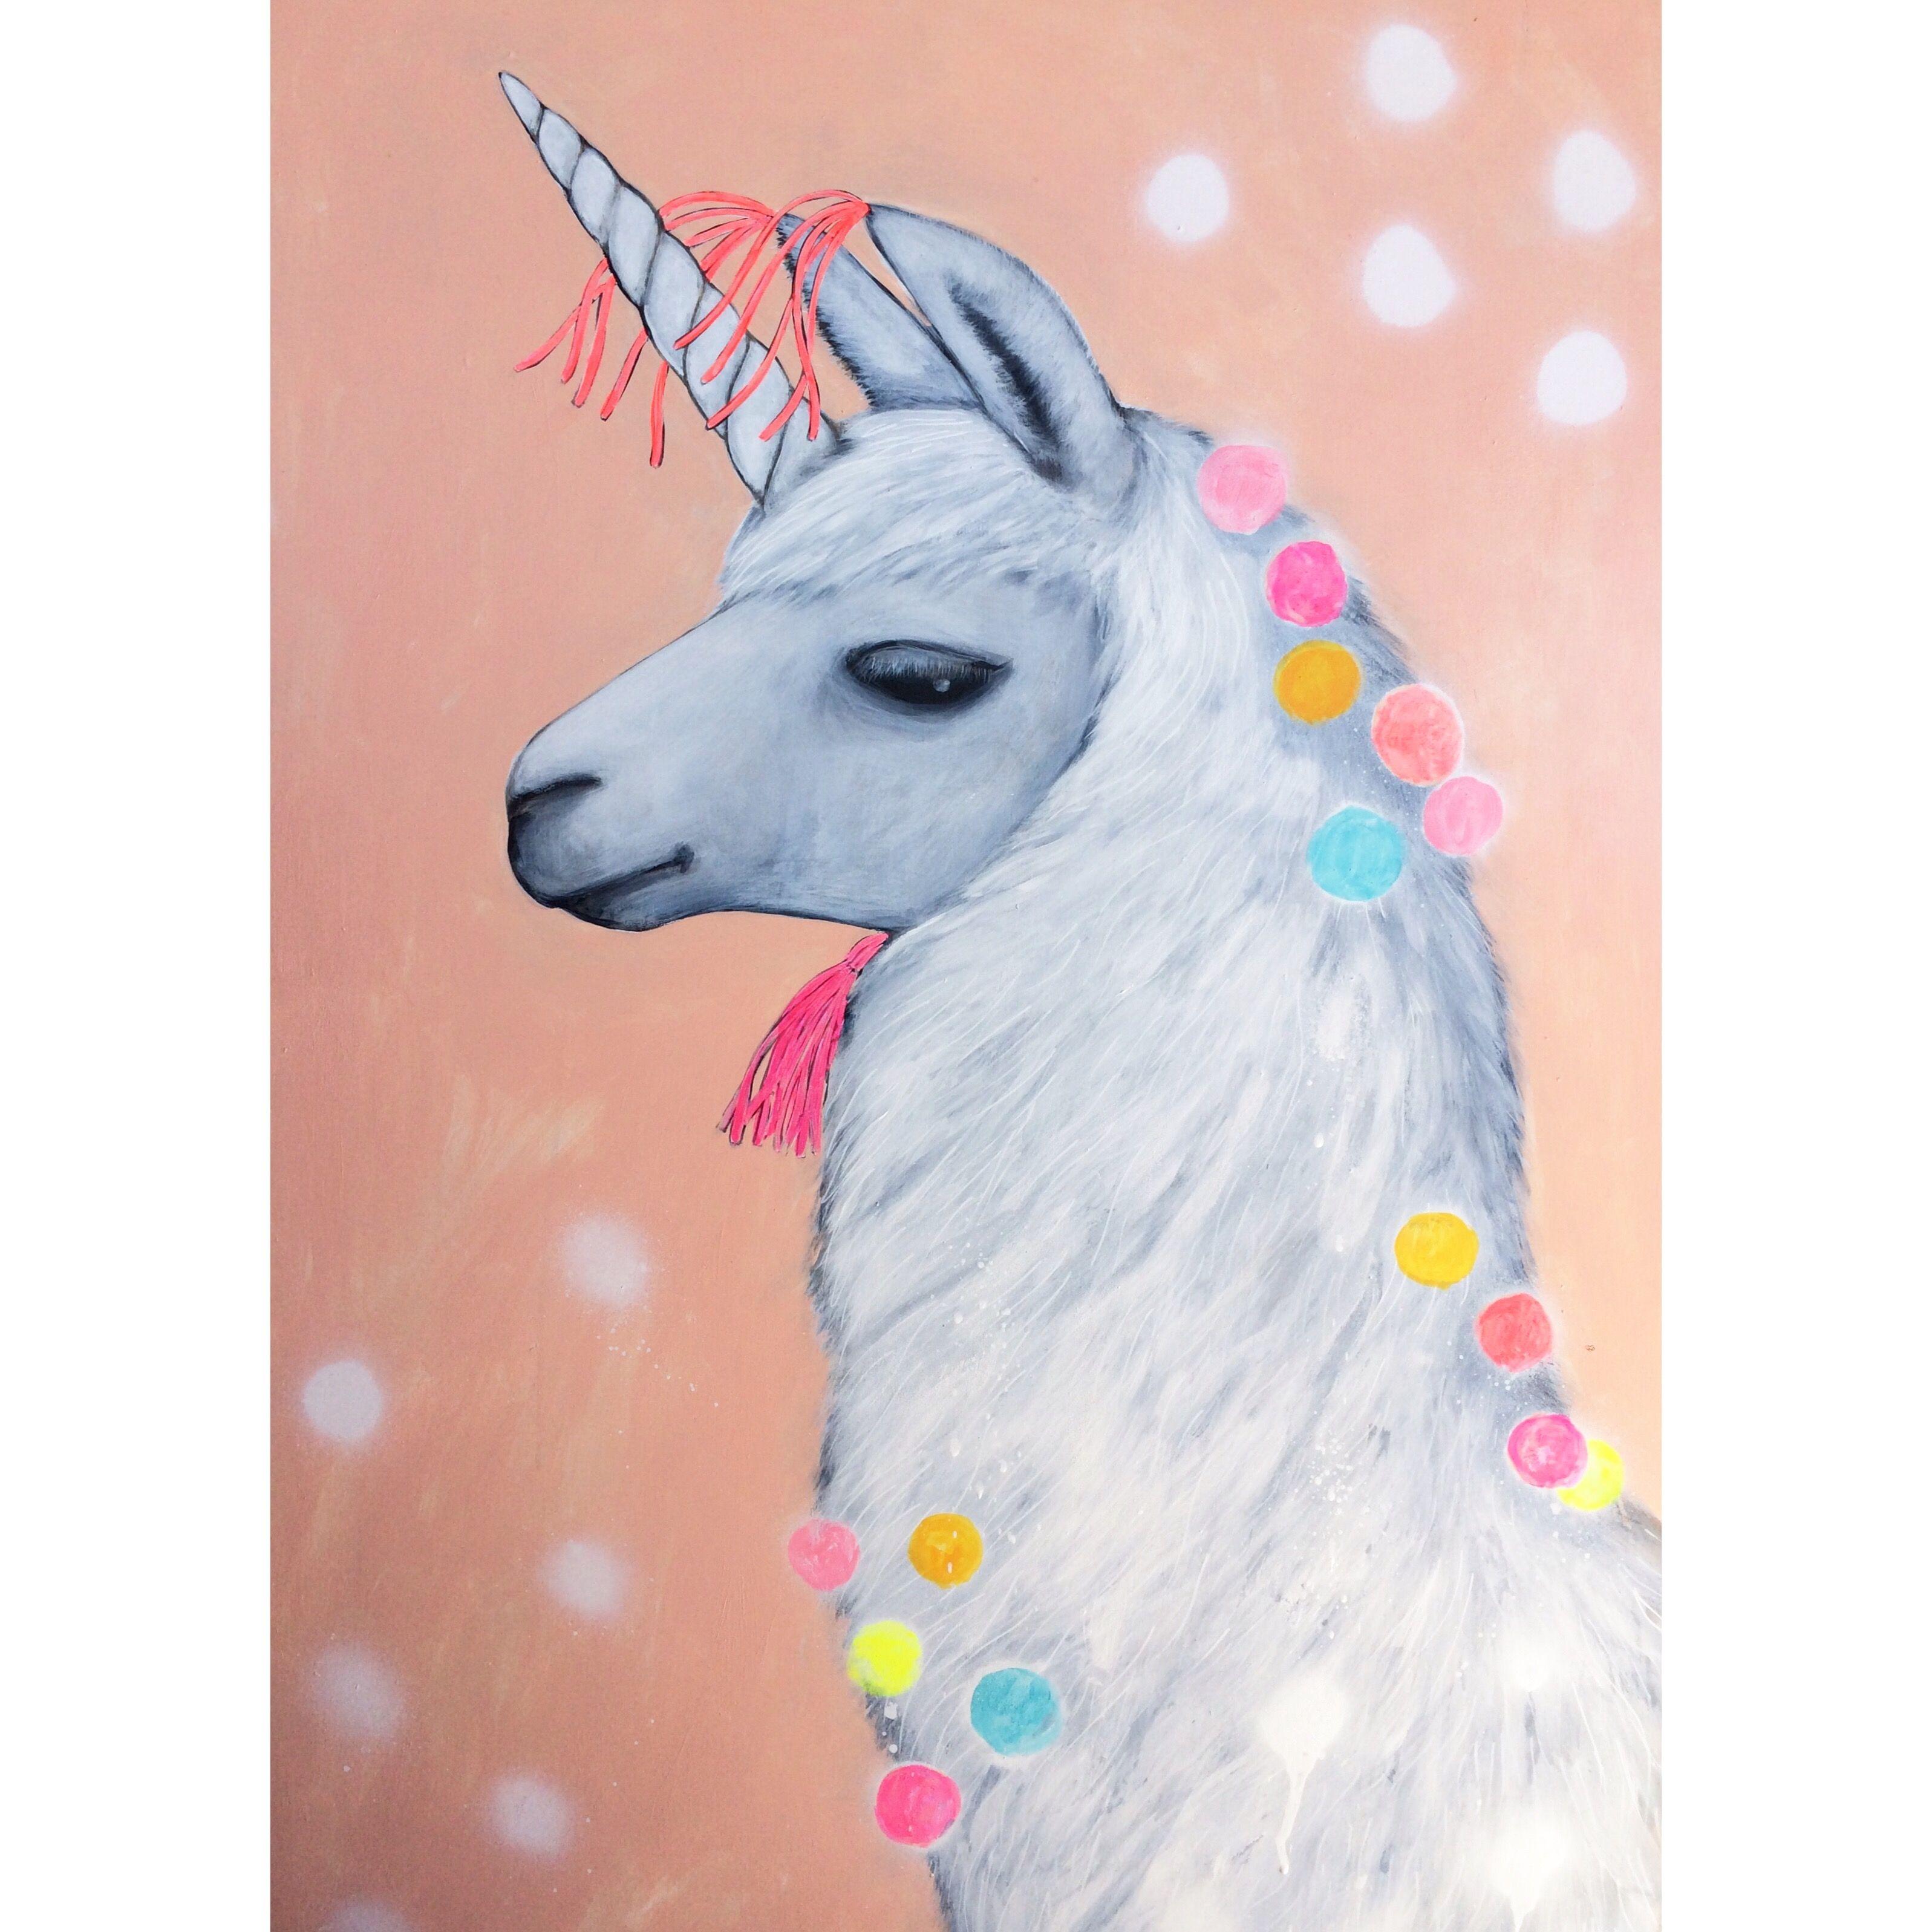 Unicorn Llama aka Llamacorn; 'Come Away With me'. Available in A3